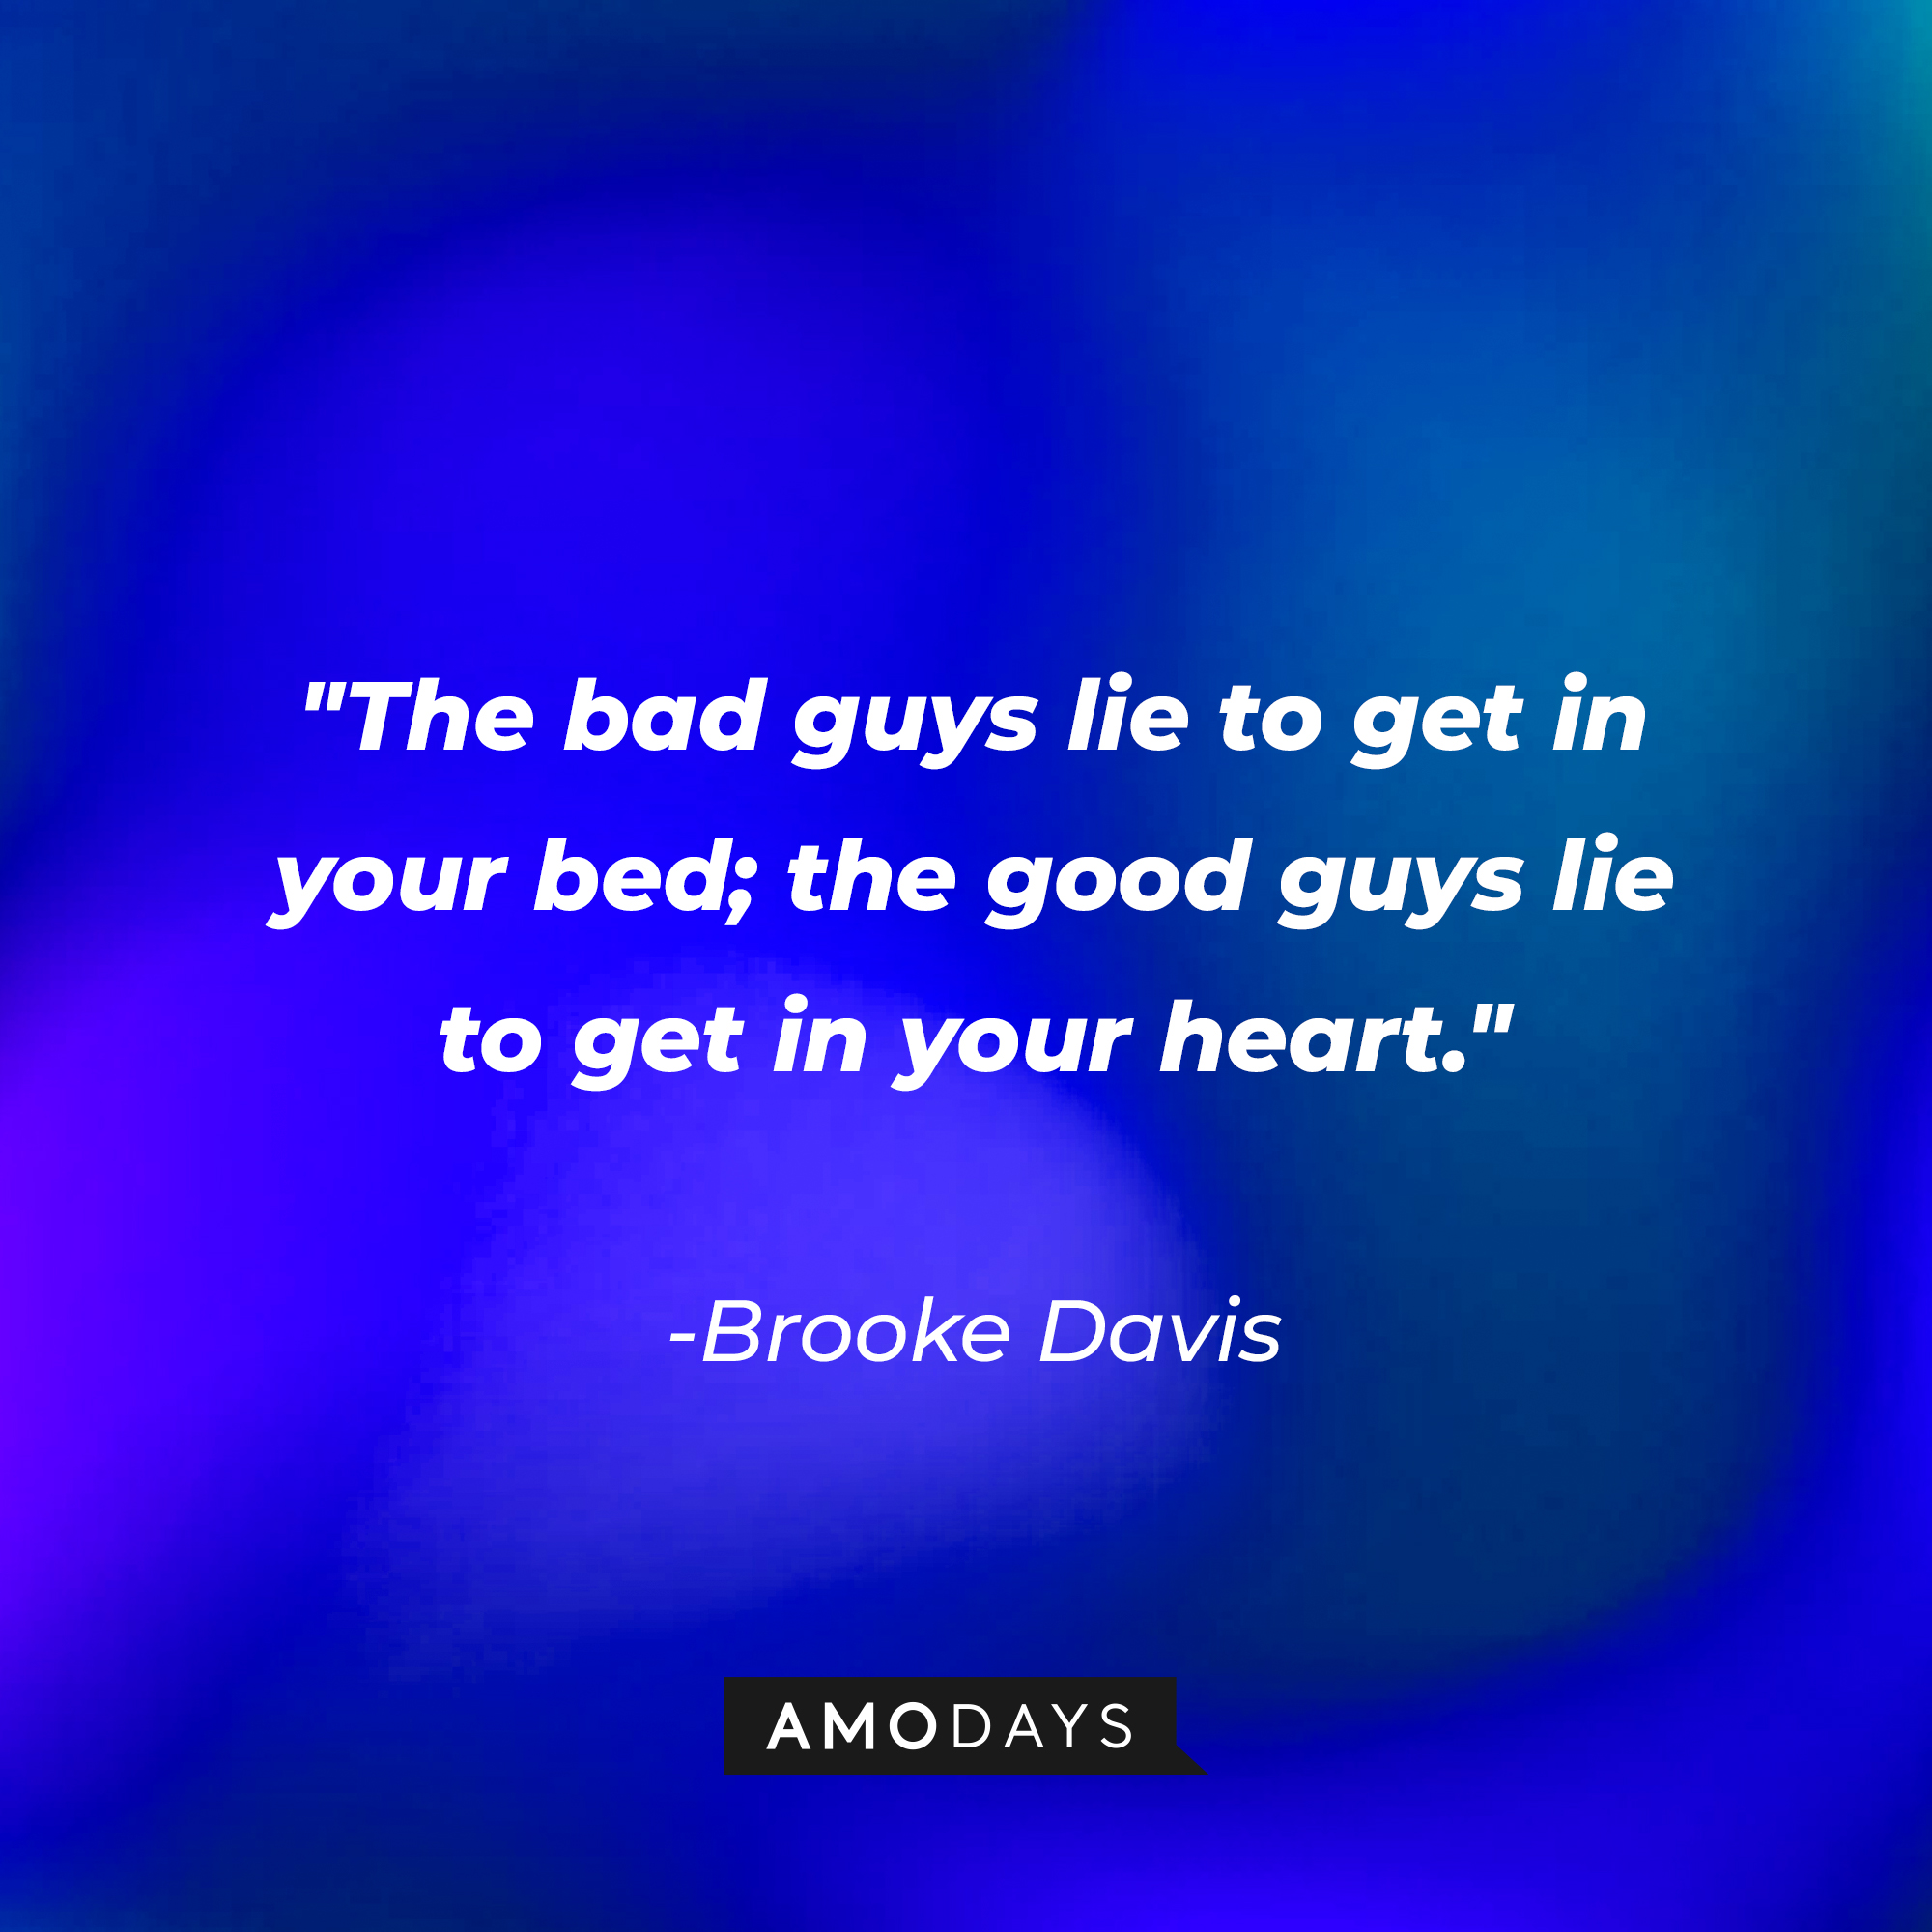 Brooke Davis' quote: "The bad guys lie to get in your bed; the good guys lie to get in your heart." | Source: AmoDays